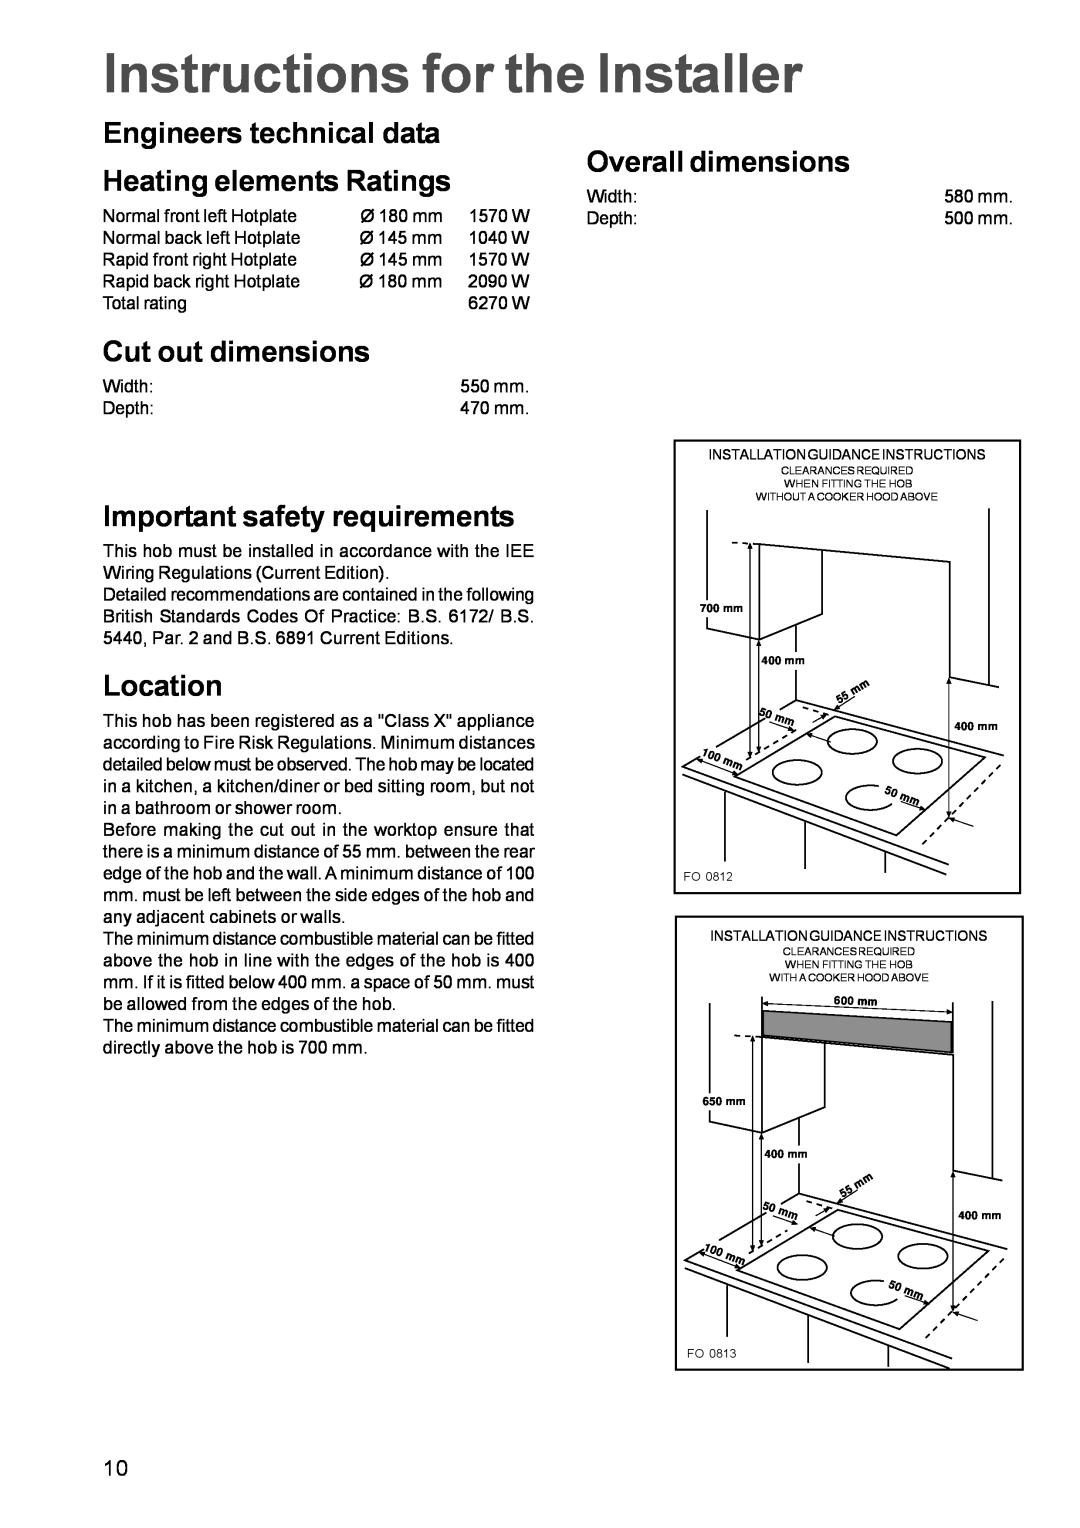 Zanussi ZEL 63 Instructions for the Installer, Engineers technical data, Heating elements Ratings, Overall dimensions 